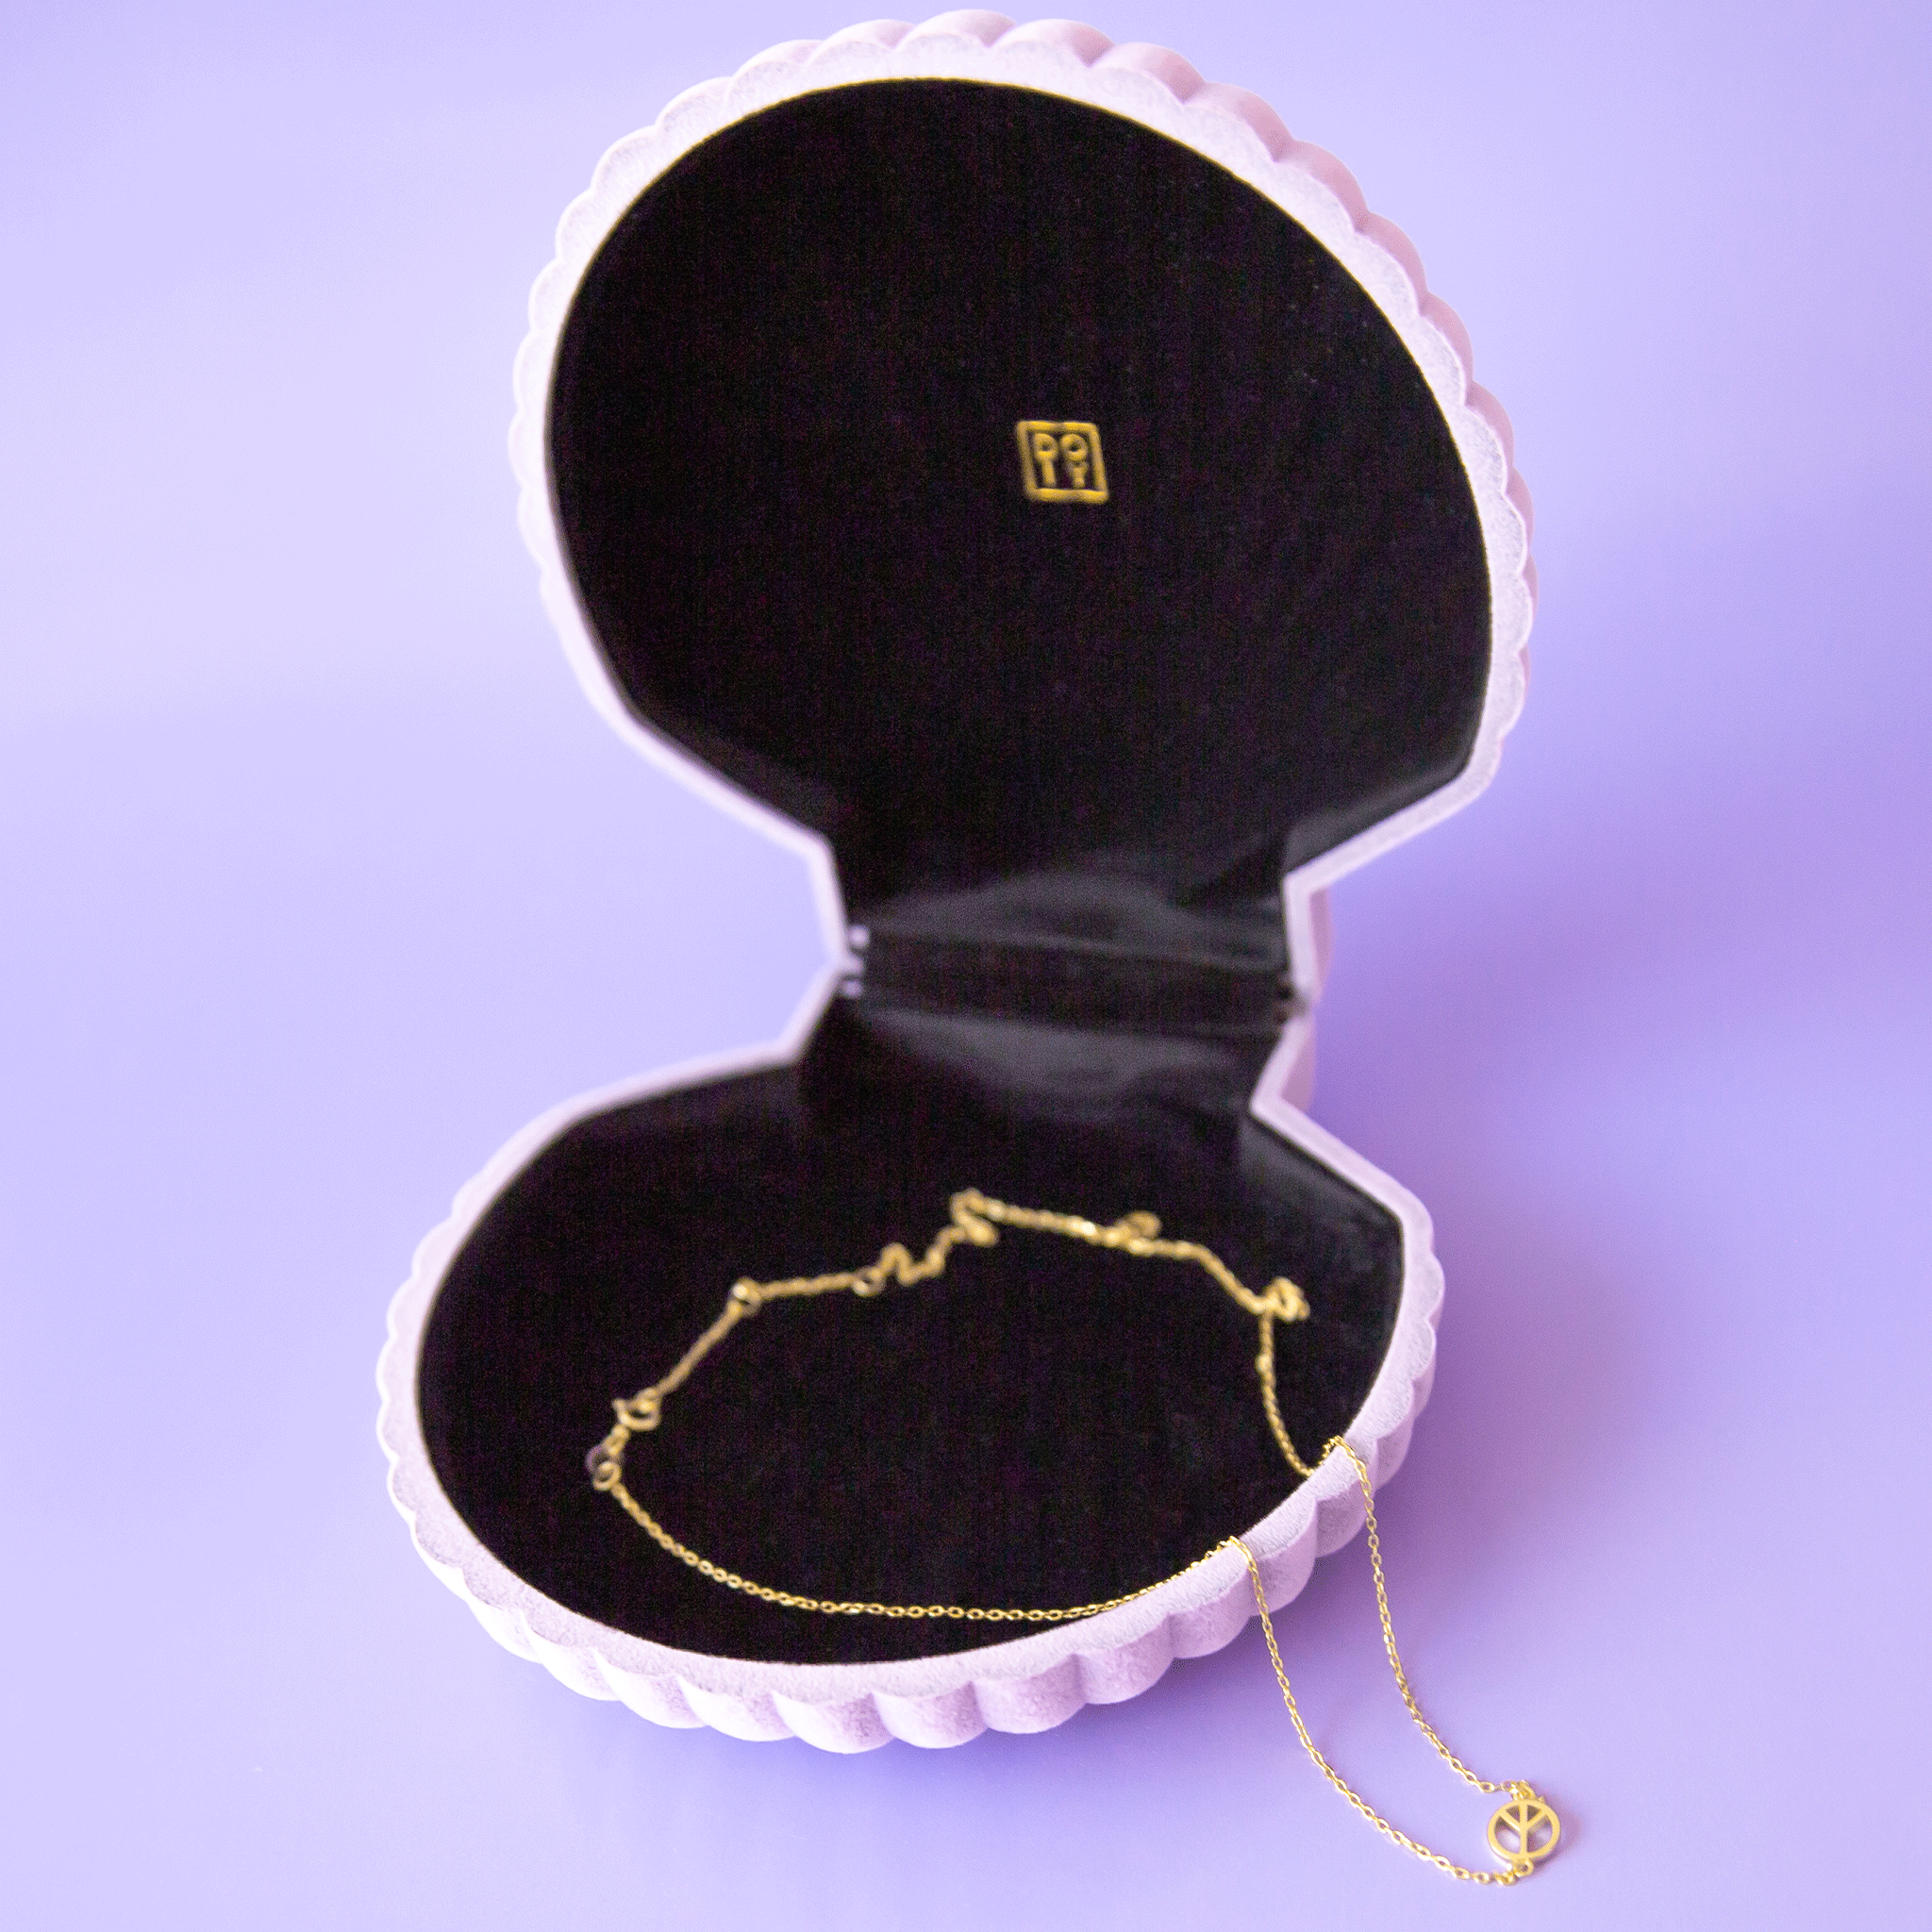 On a purple background is a purple velvet seashell shaped jewelry box with a necklace inside that is not included with purchase.